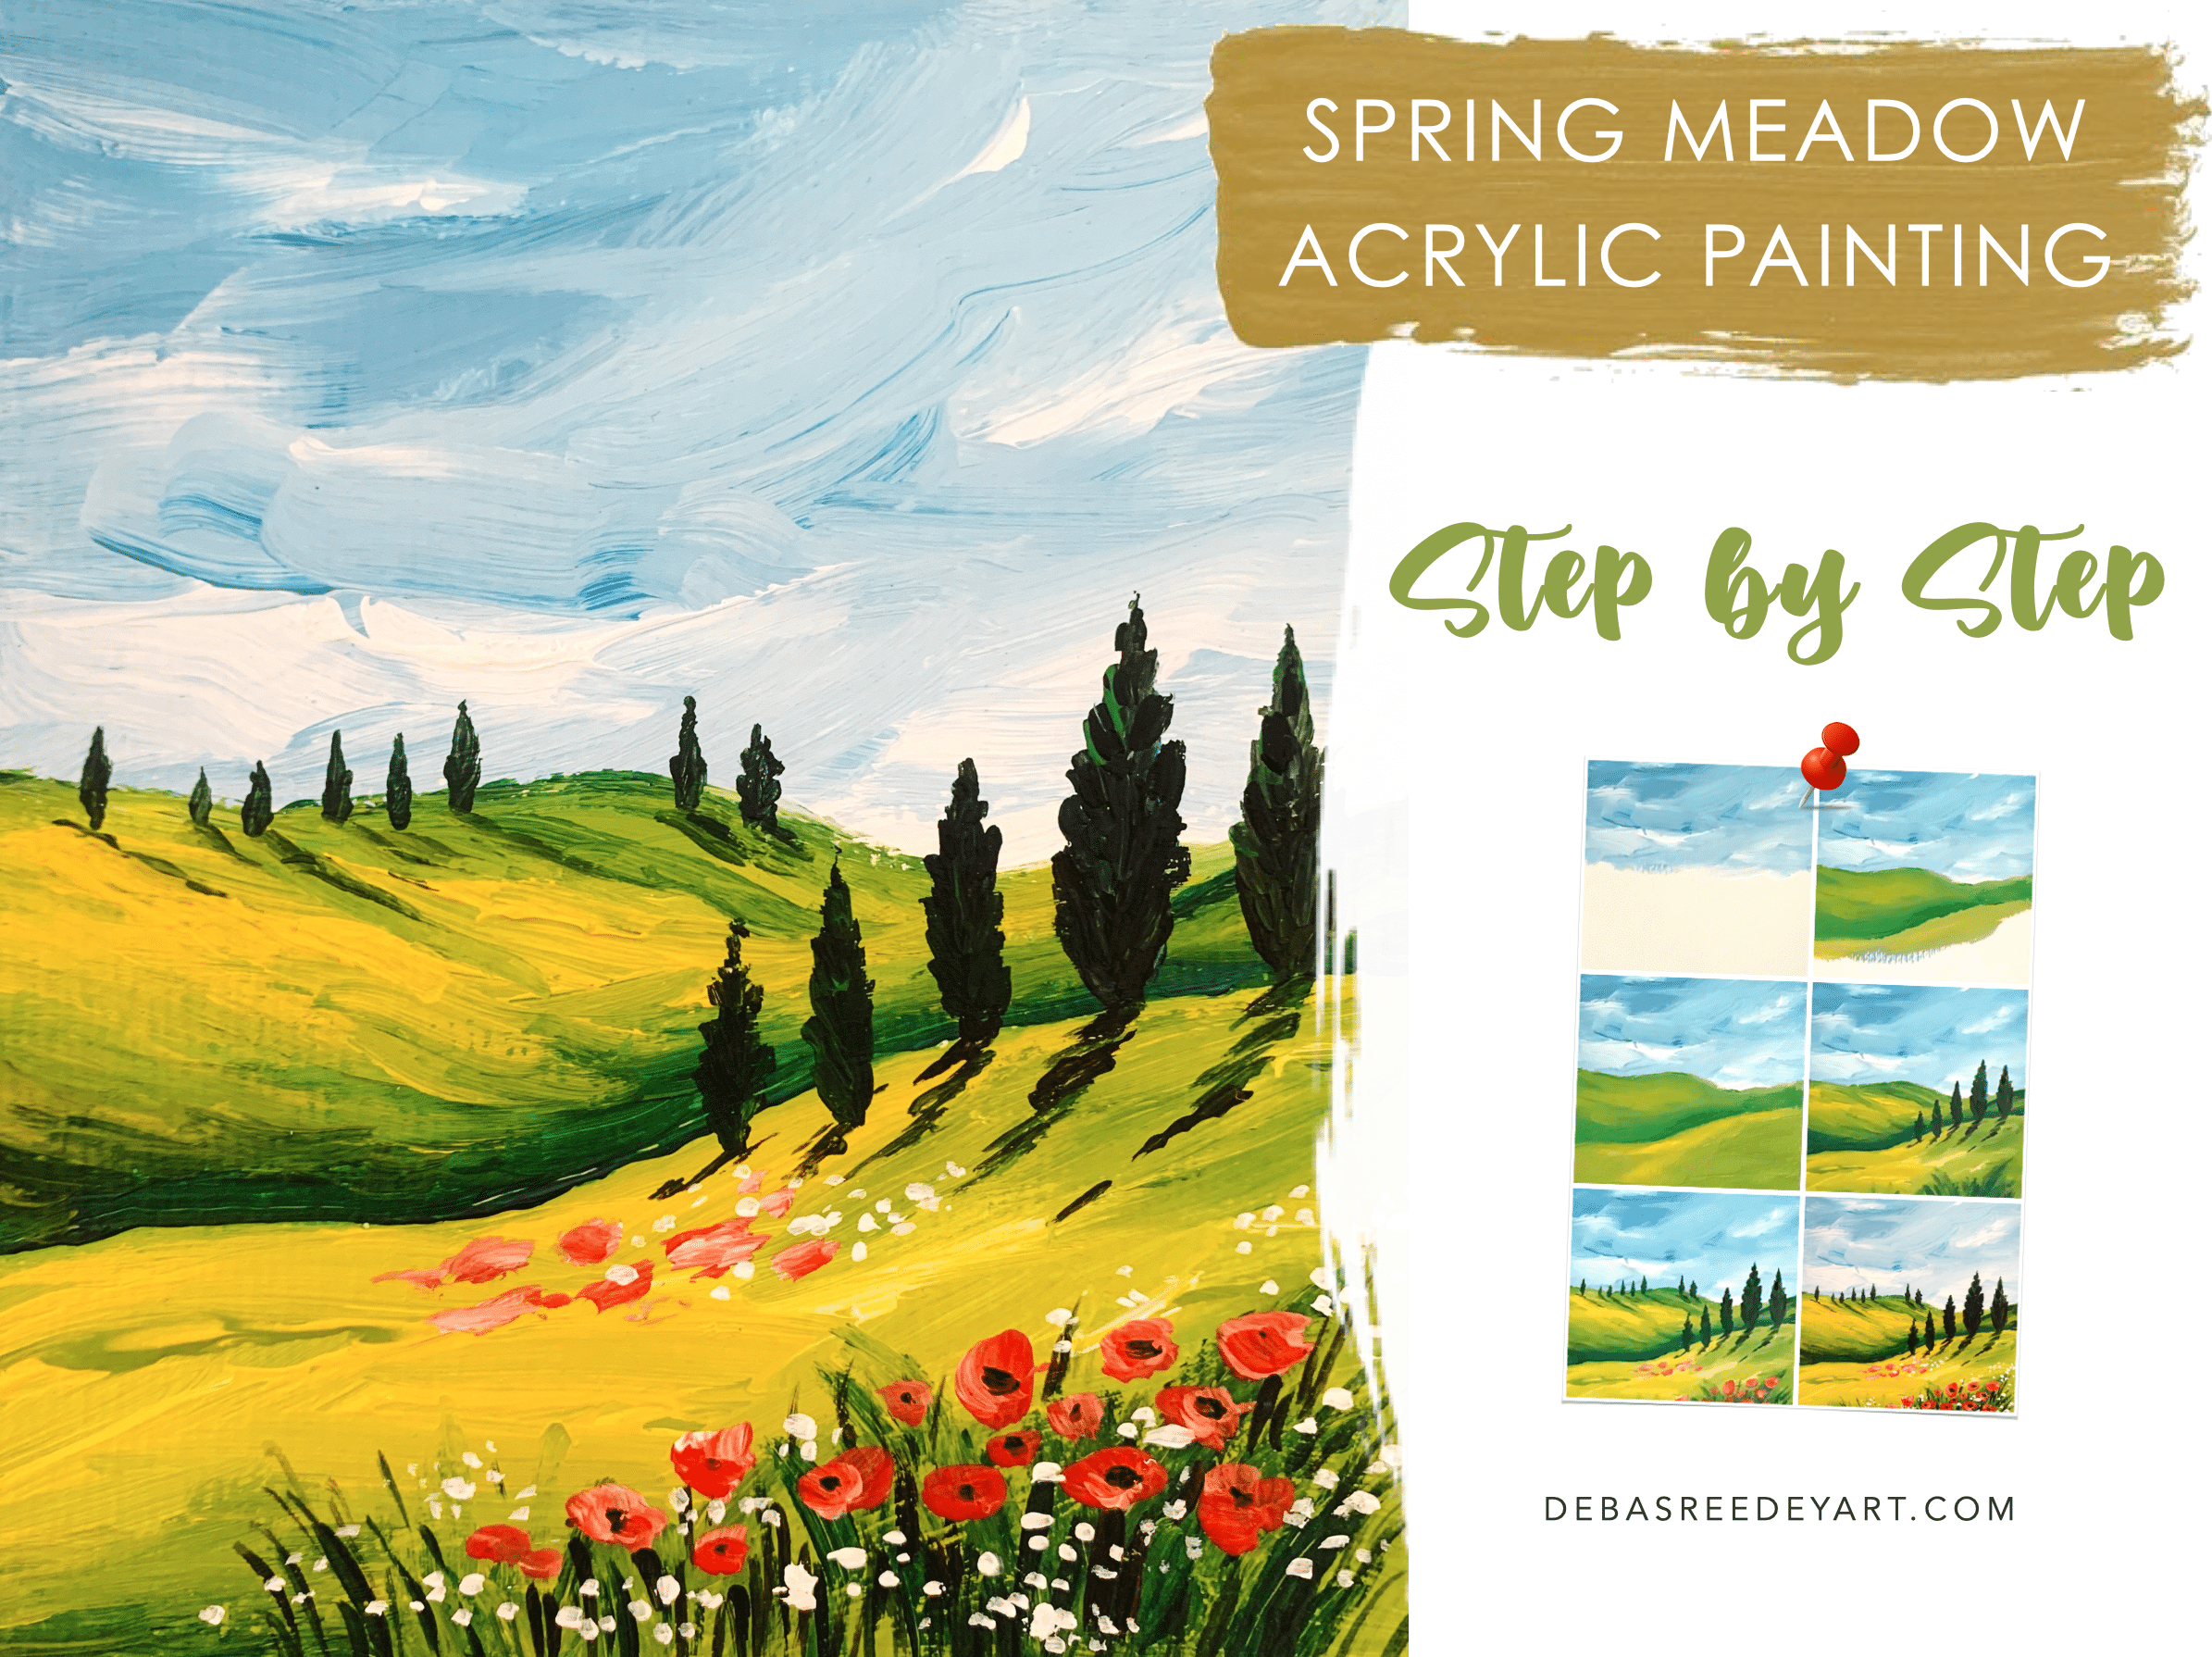 Acrylic Painting Step by Step [Book]